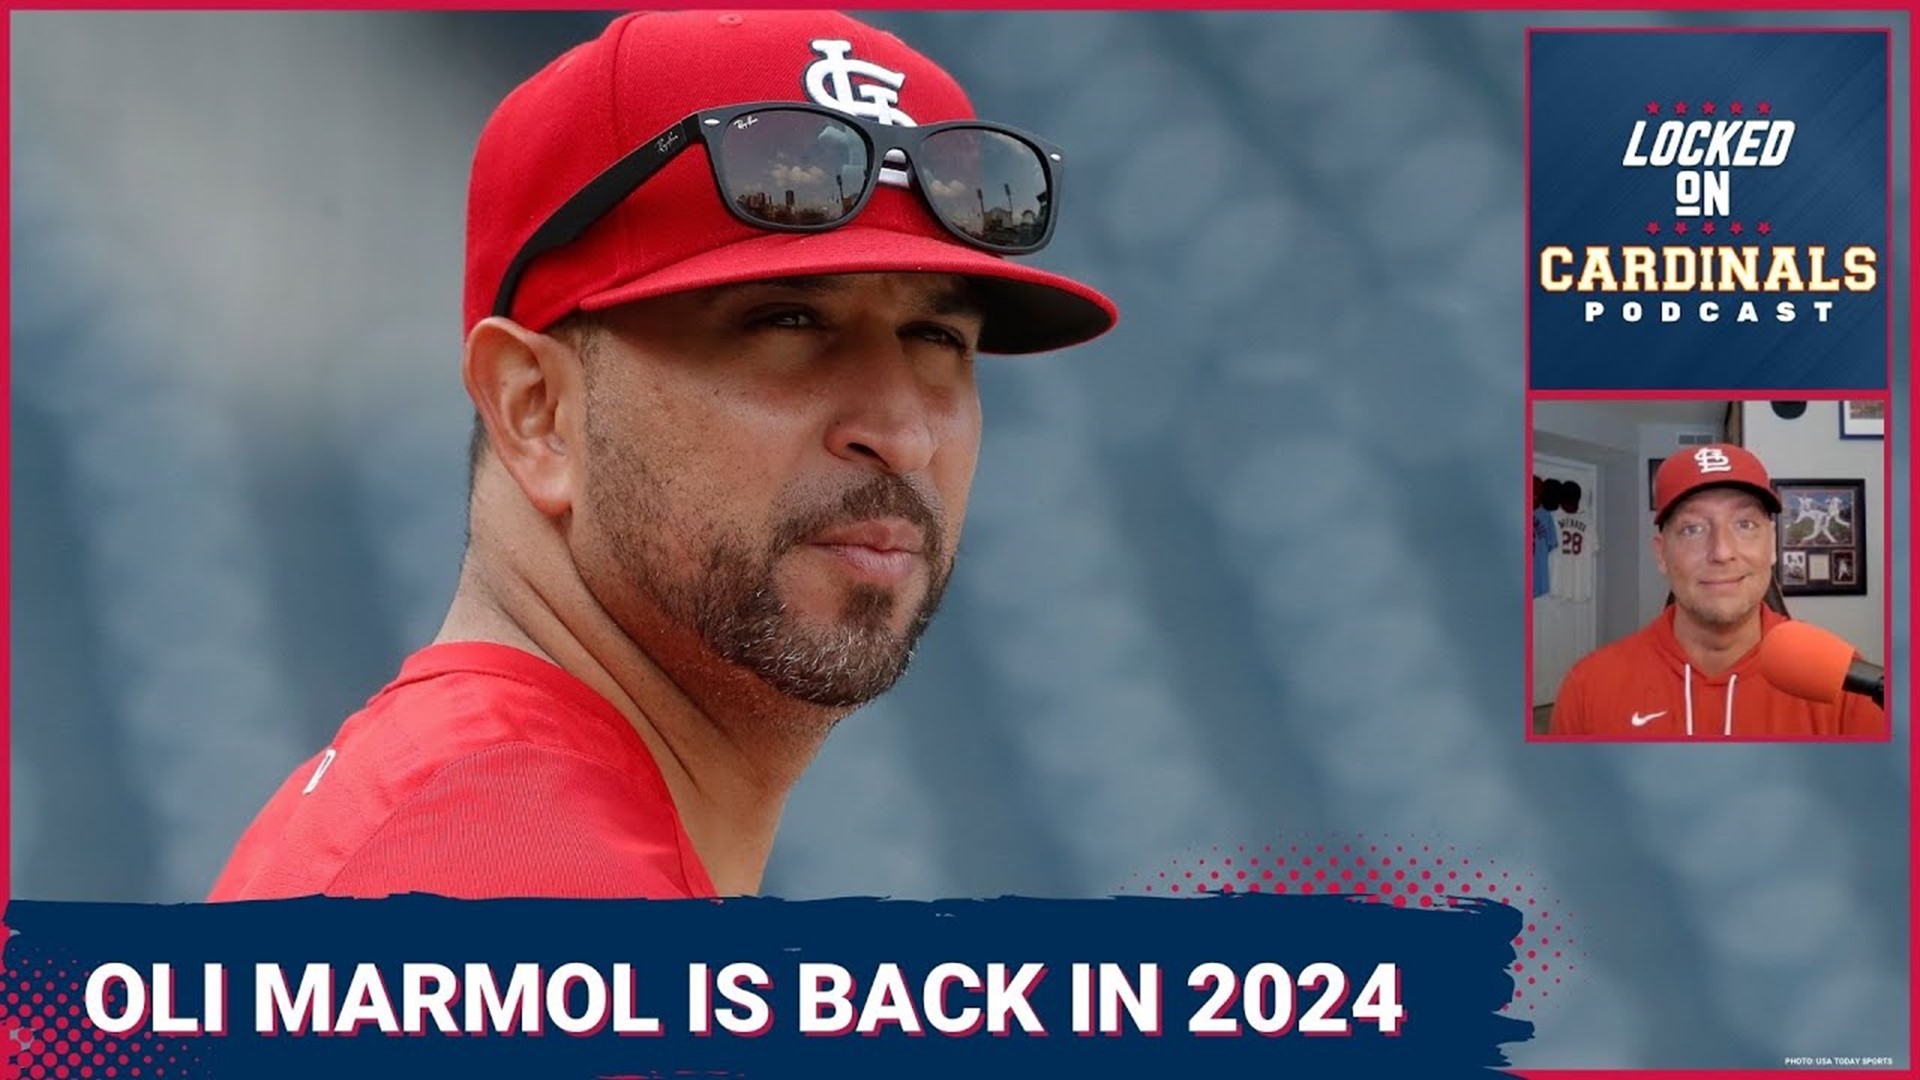 John Mozeliak Speaks About The Return Of Oli Marmol And The Rest Of The Cardinals Coaching Staff